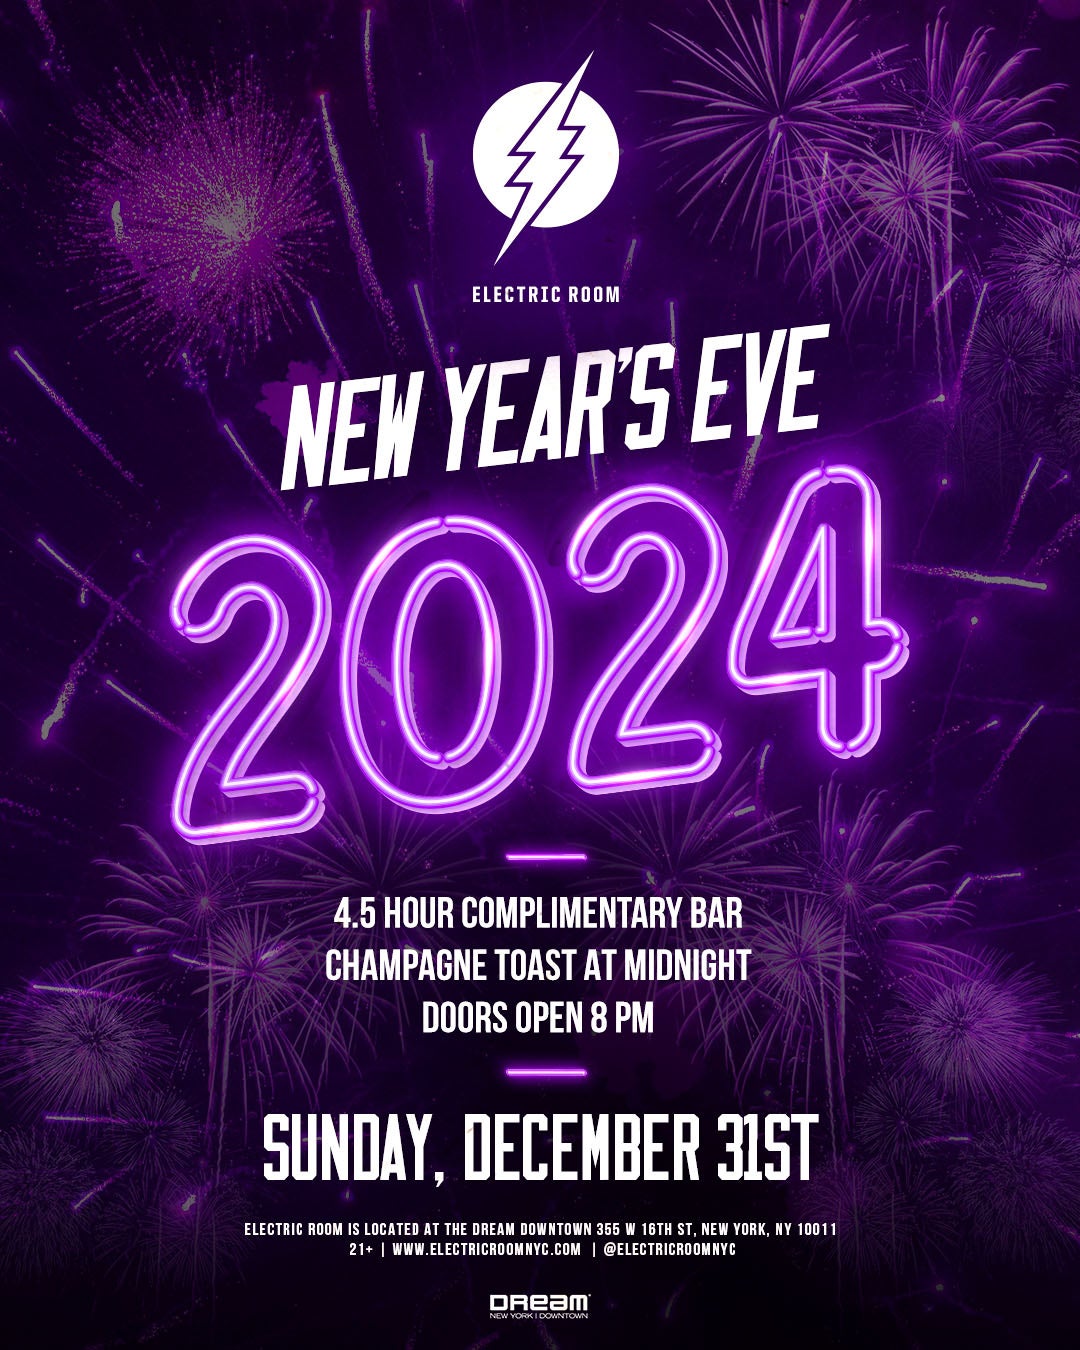 2023 New Year Open